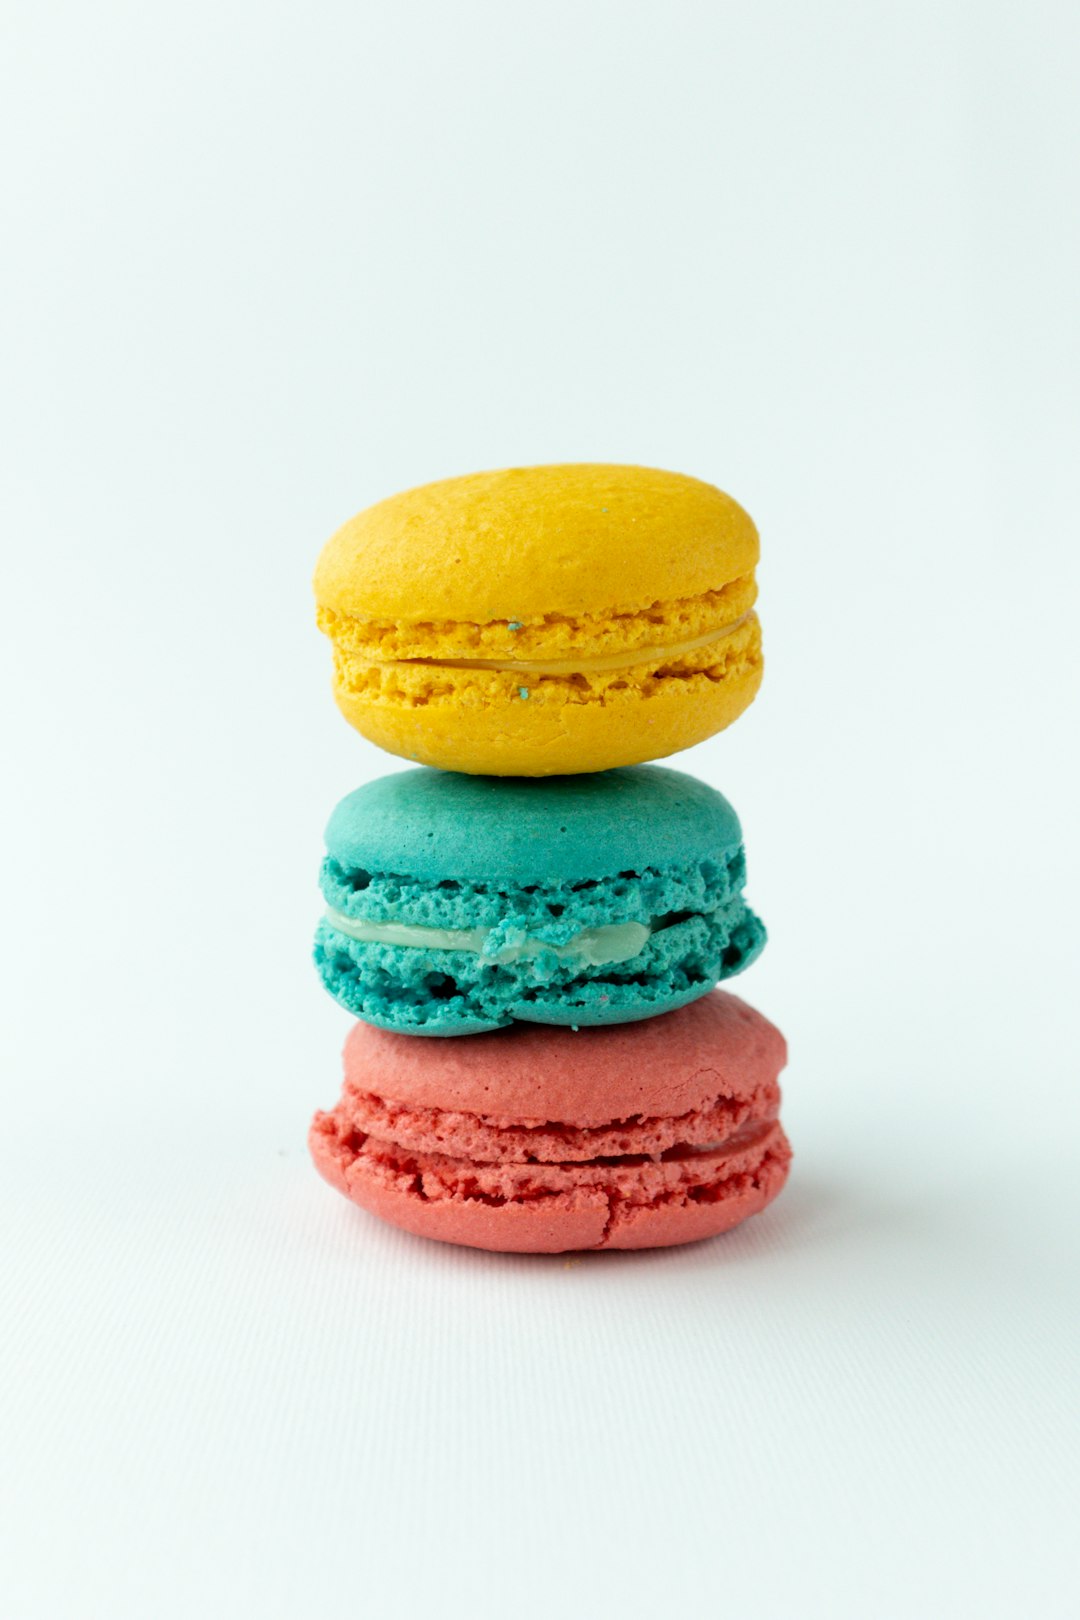 Macarons Pictures | Download Free Images on Unsplash